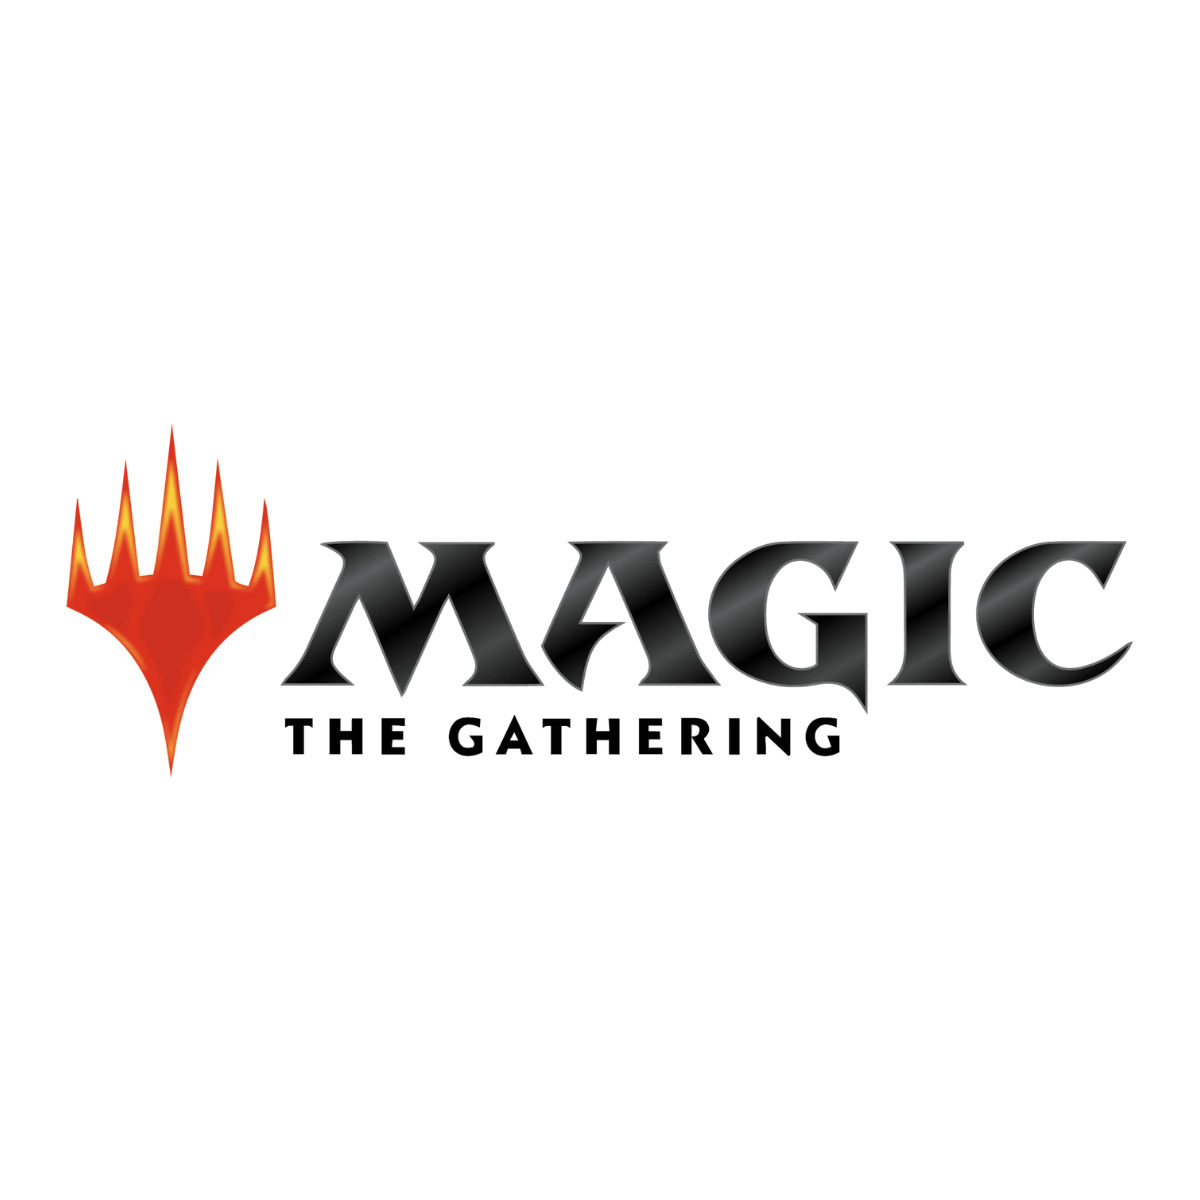 Magic: The Gathering Character Sleeve Collection [MTGS-235] "Dominaria United - Shivan Devastator"-Ensky-Ace Cards & Collectibles